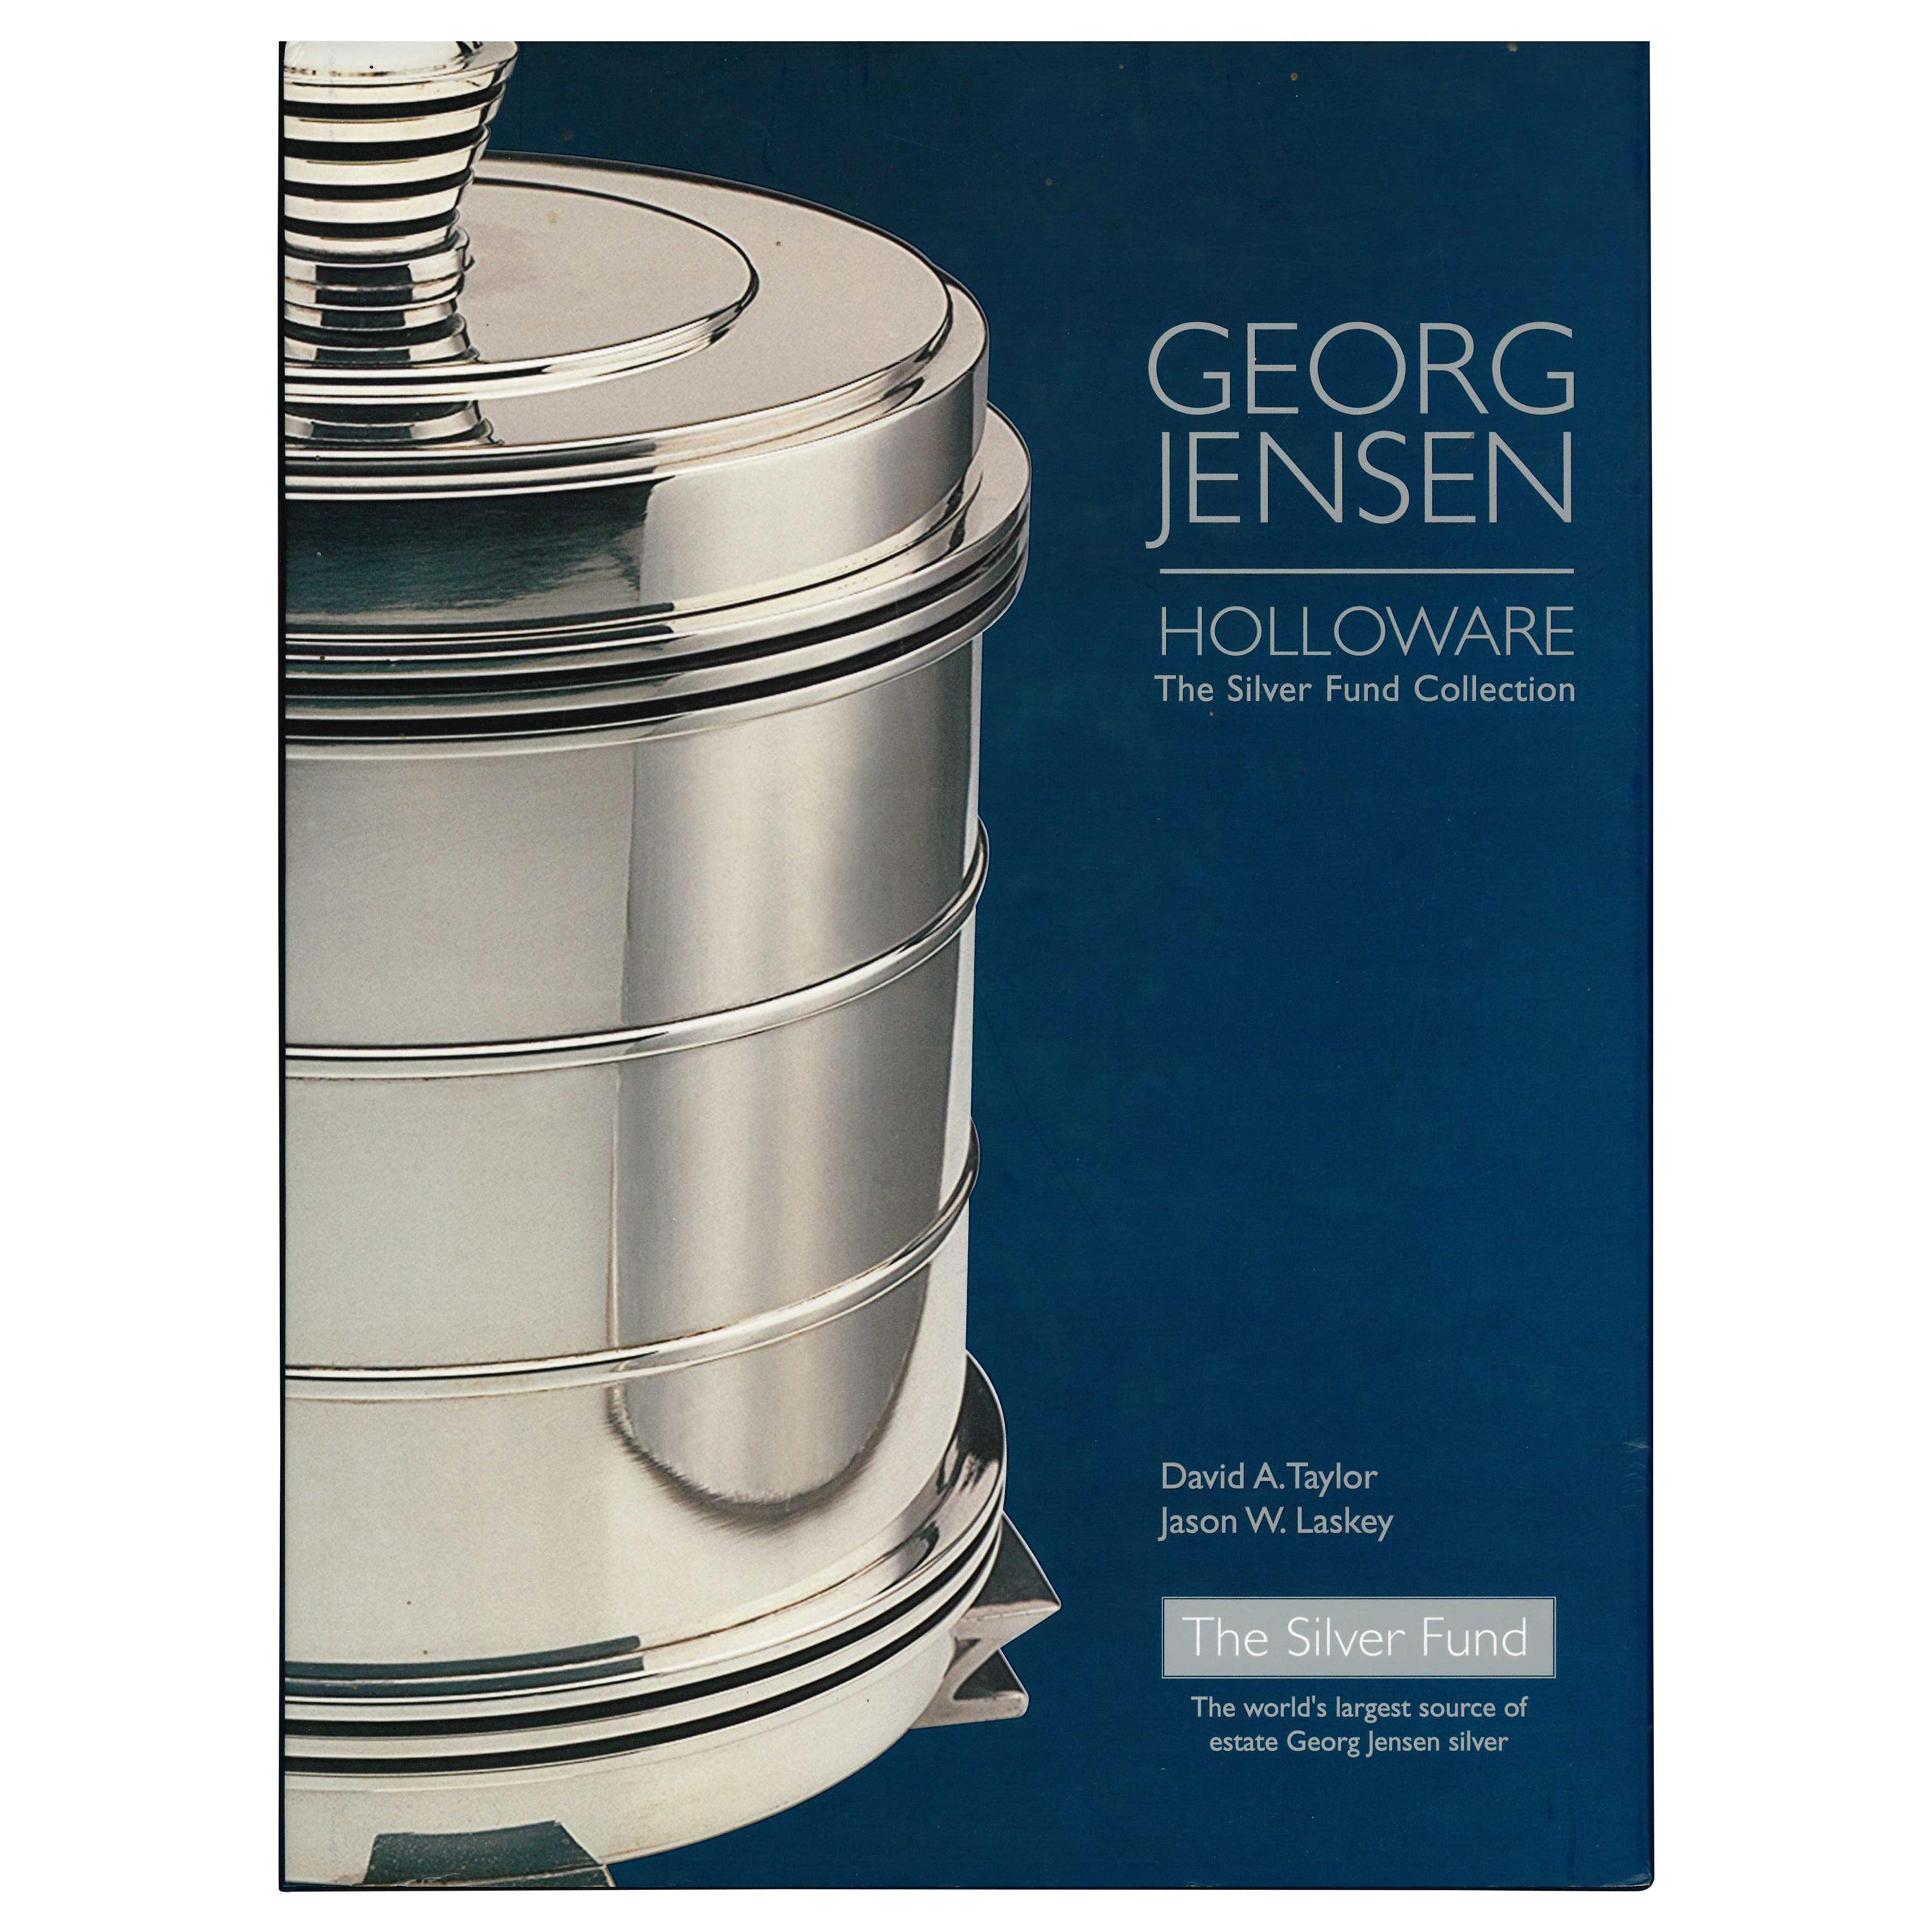 Georg Jensen: Holloware The Silver Fund Collection Book) For Sale